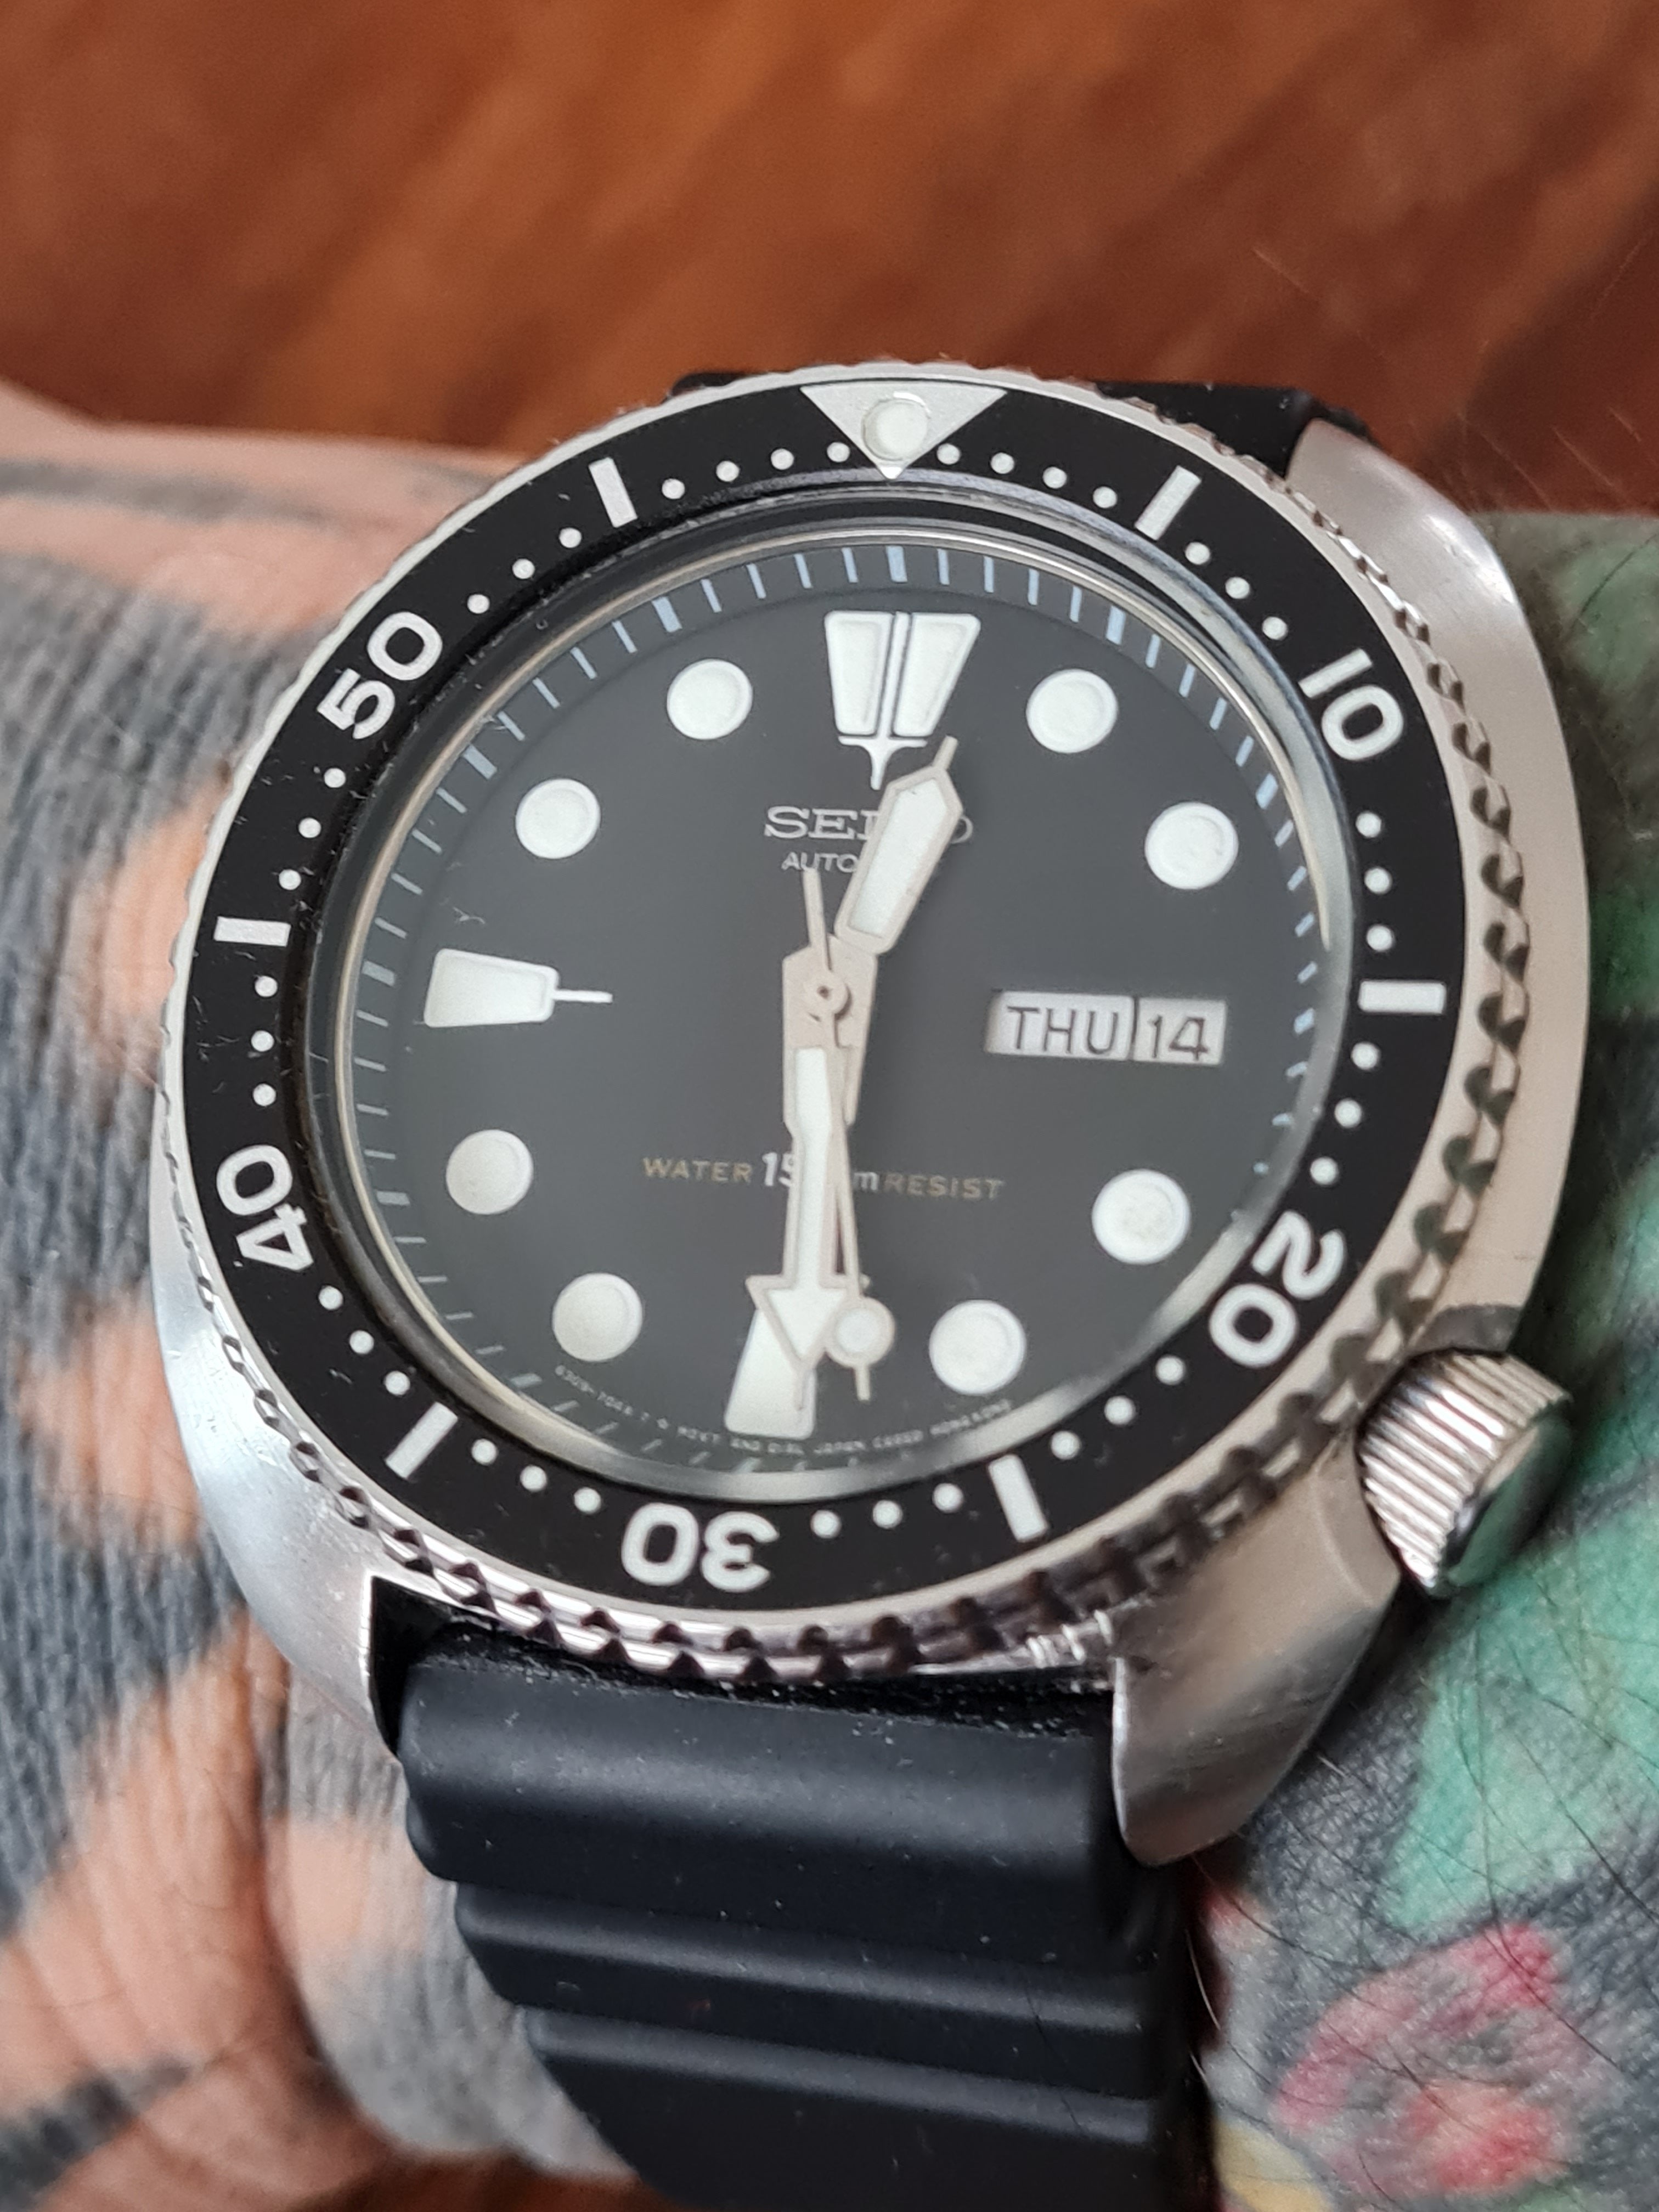 Just can't appreciate Seiko's cushion cases | WatchUSeek Watch Forums